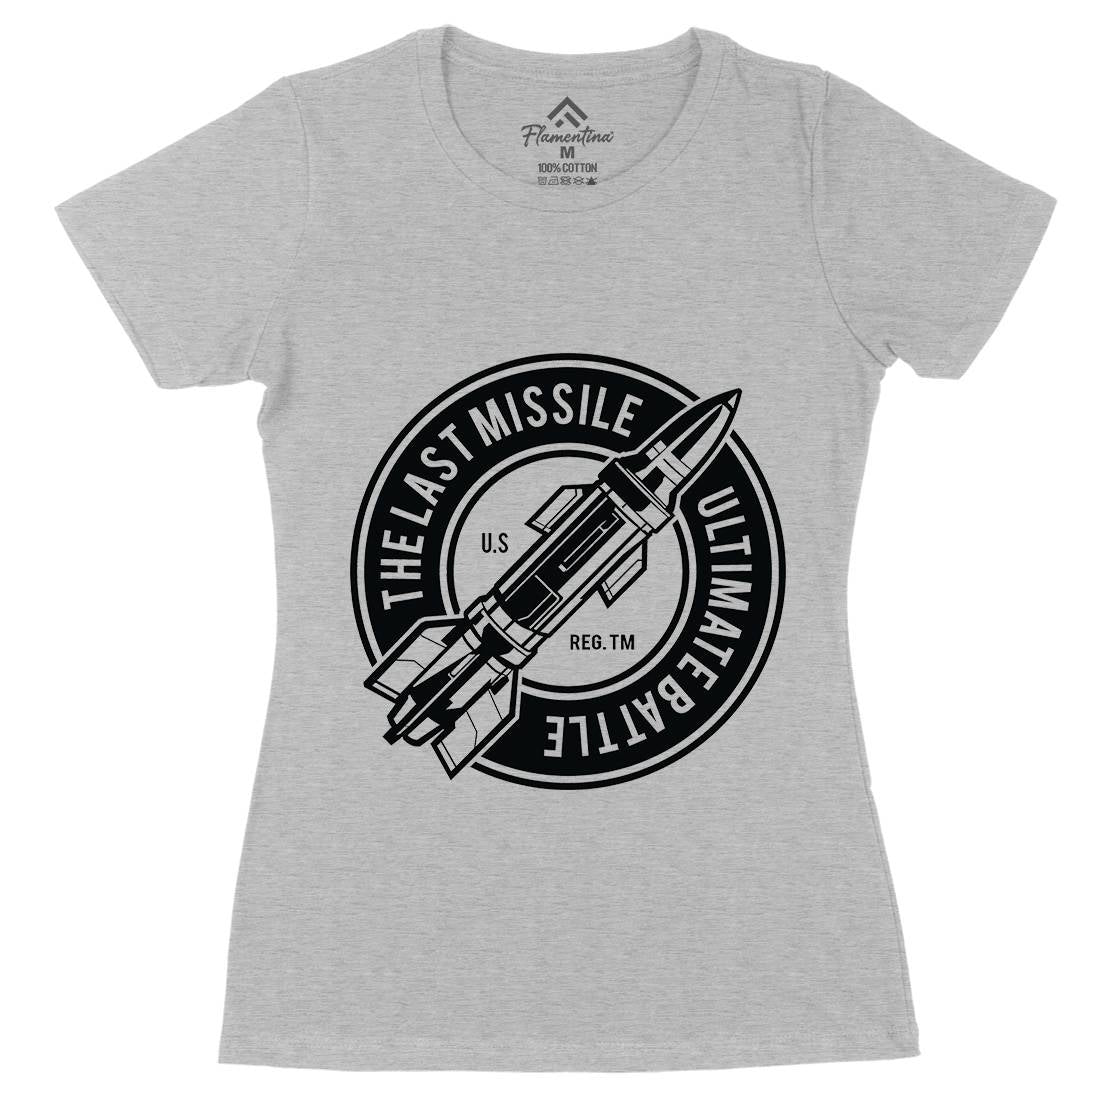 Last Missile Womens Organic Crew Neck T-Shirt Army A175